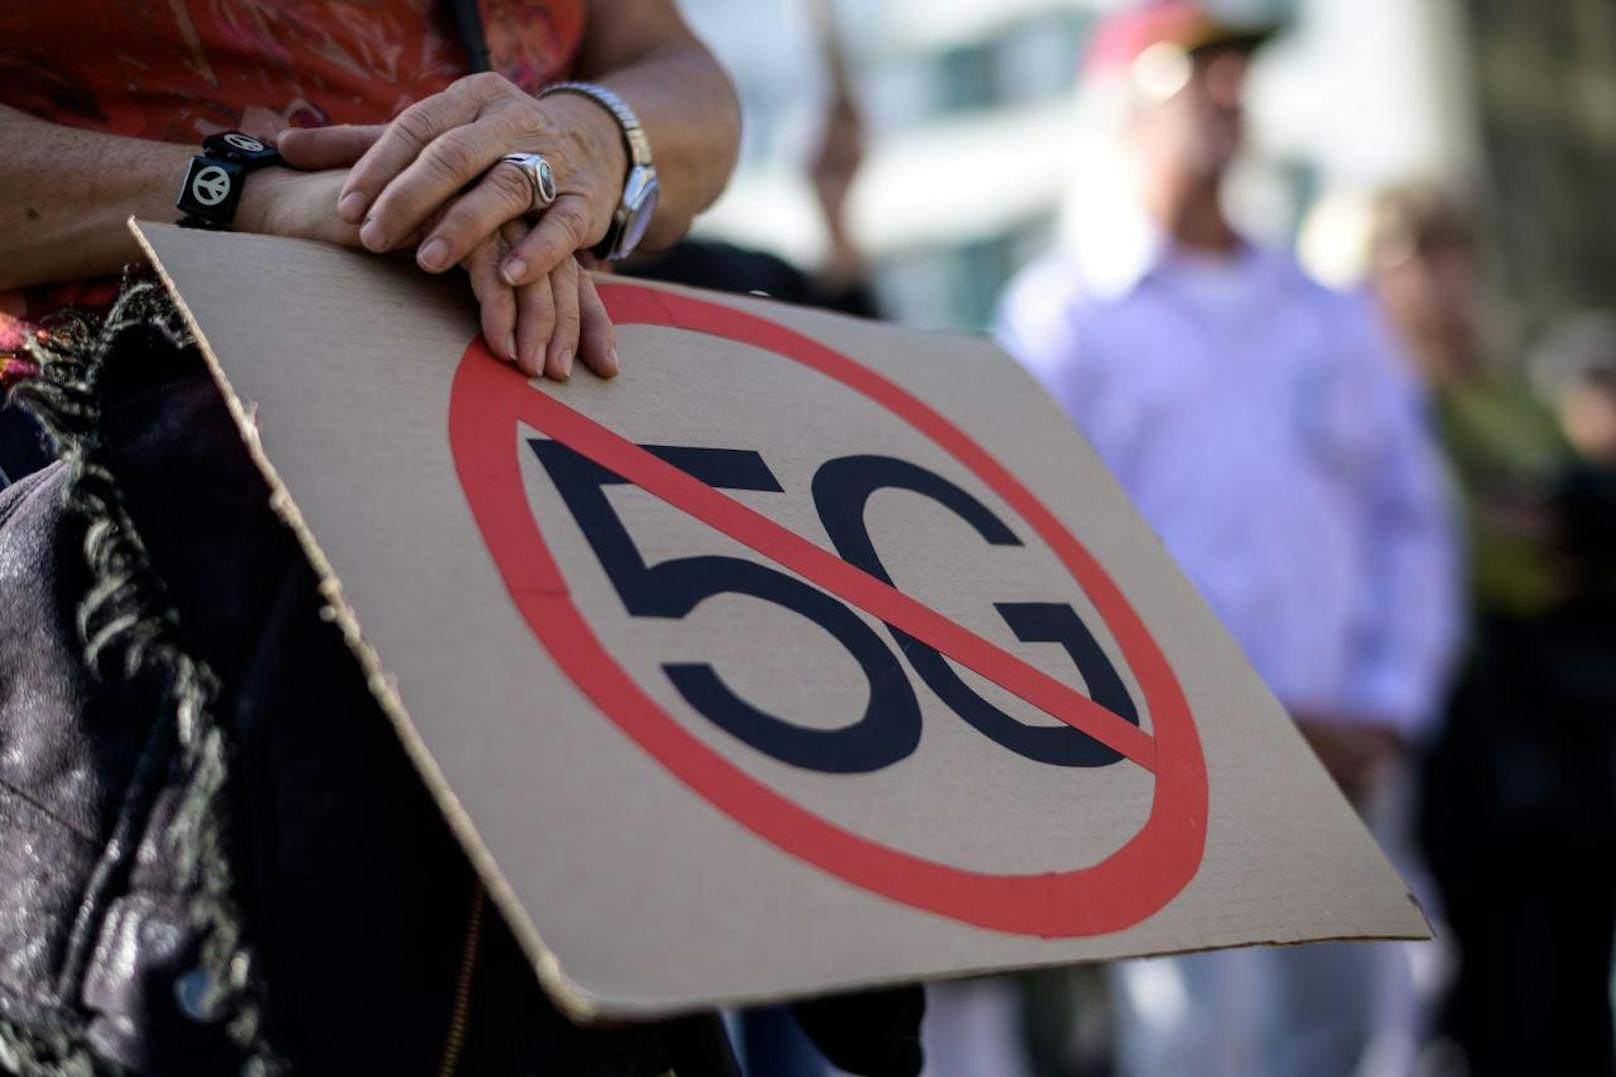 Download von www.picturedesk.com am 22.09.2019 (08:56). 
People take part in a national demonstration against 5G technology and the deployment of 5G-compatible antennas outside the Swiss Parliament in Bern, on September 21, 2019. - Switzerland was one of the first countries to deploy 5G, but health concerns about the radiation of antennas carrying next-generation mobile technology have triggered a nationwide revolt. (Photo by Fabrice COFFRINI / AFP) - 20190921_PD8330 - Rechteinfo: Nur für redaktionelle Nutzung! - Editorial Use Only! Werbliche Nutzung nur nach Freigabe!